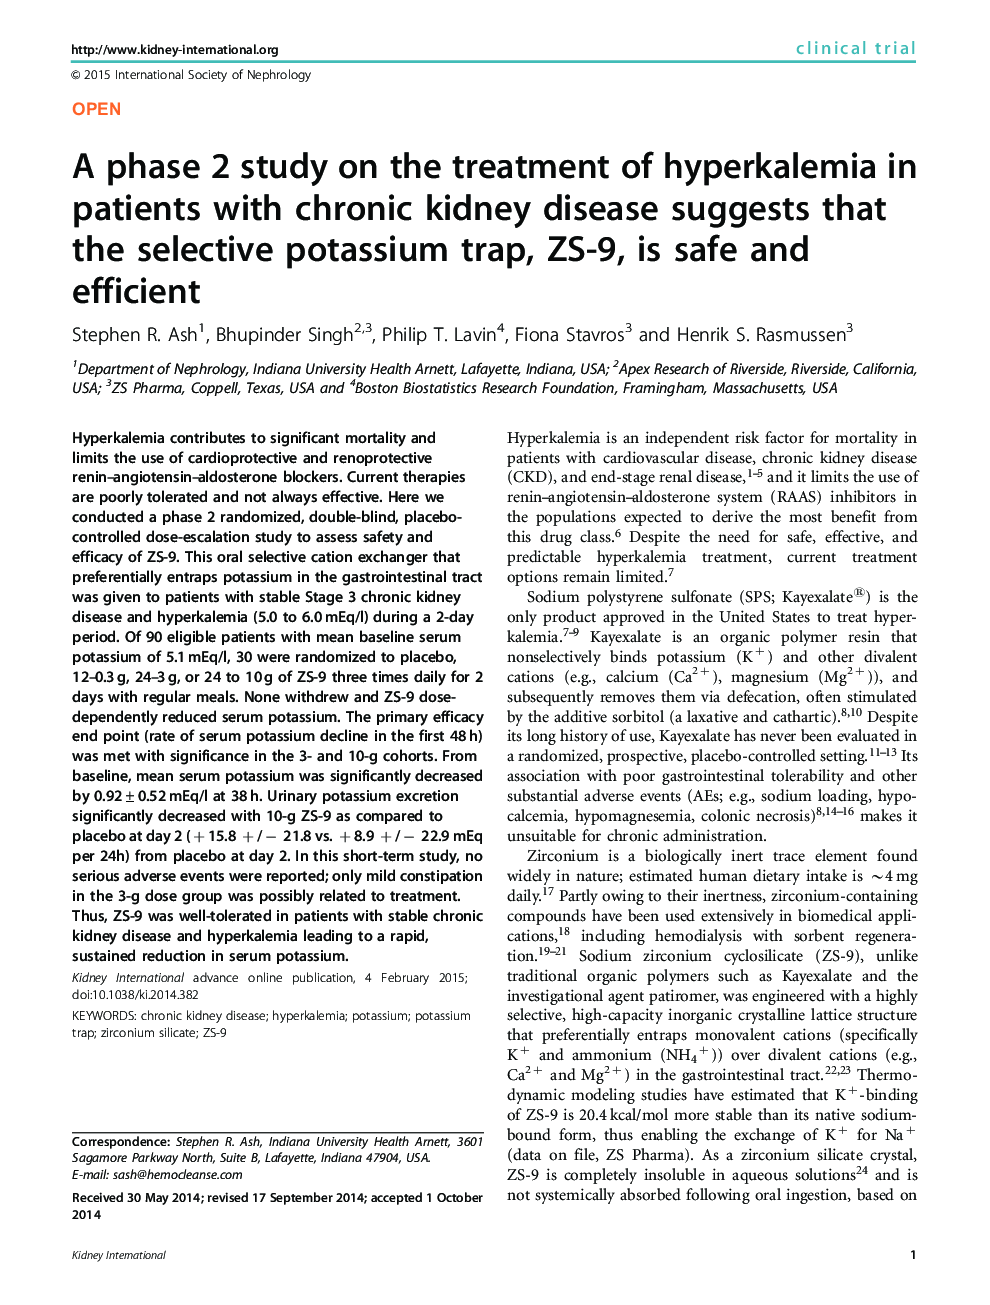 A phase 2 study on the treatment of hyperkalemia in patients with chronic kidney disease suggests that the selective potassium trap, ZS-9, is safe and efficient